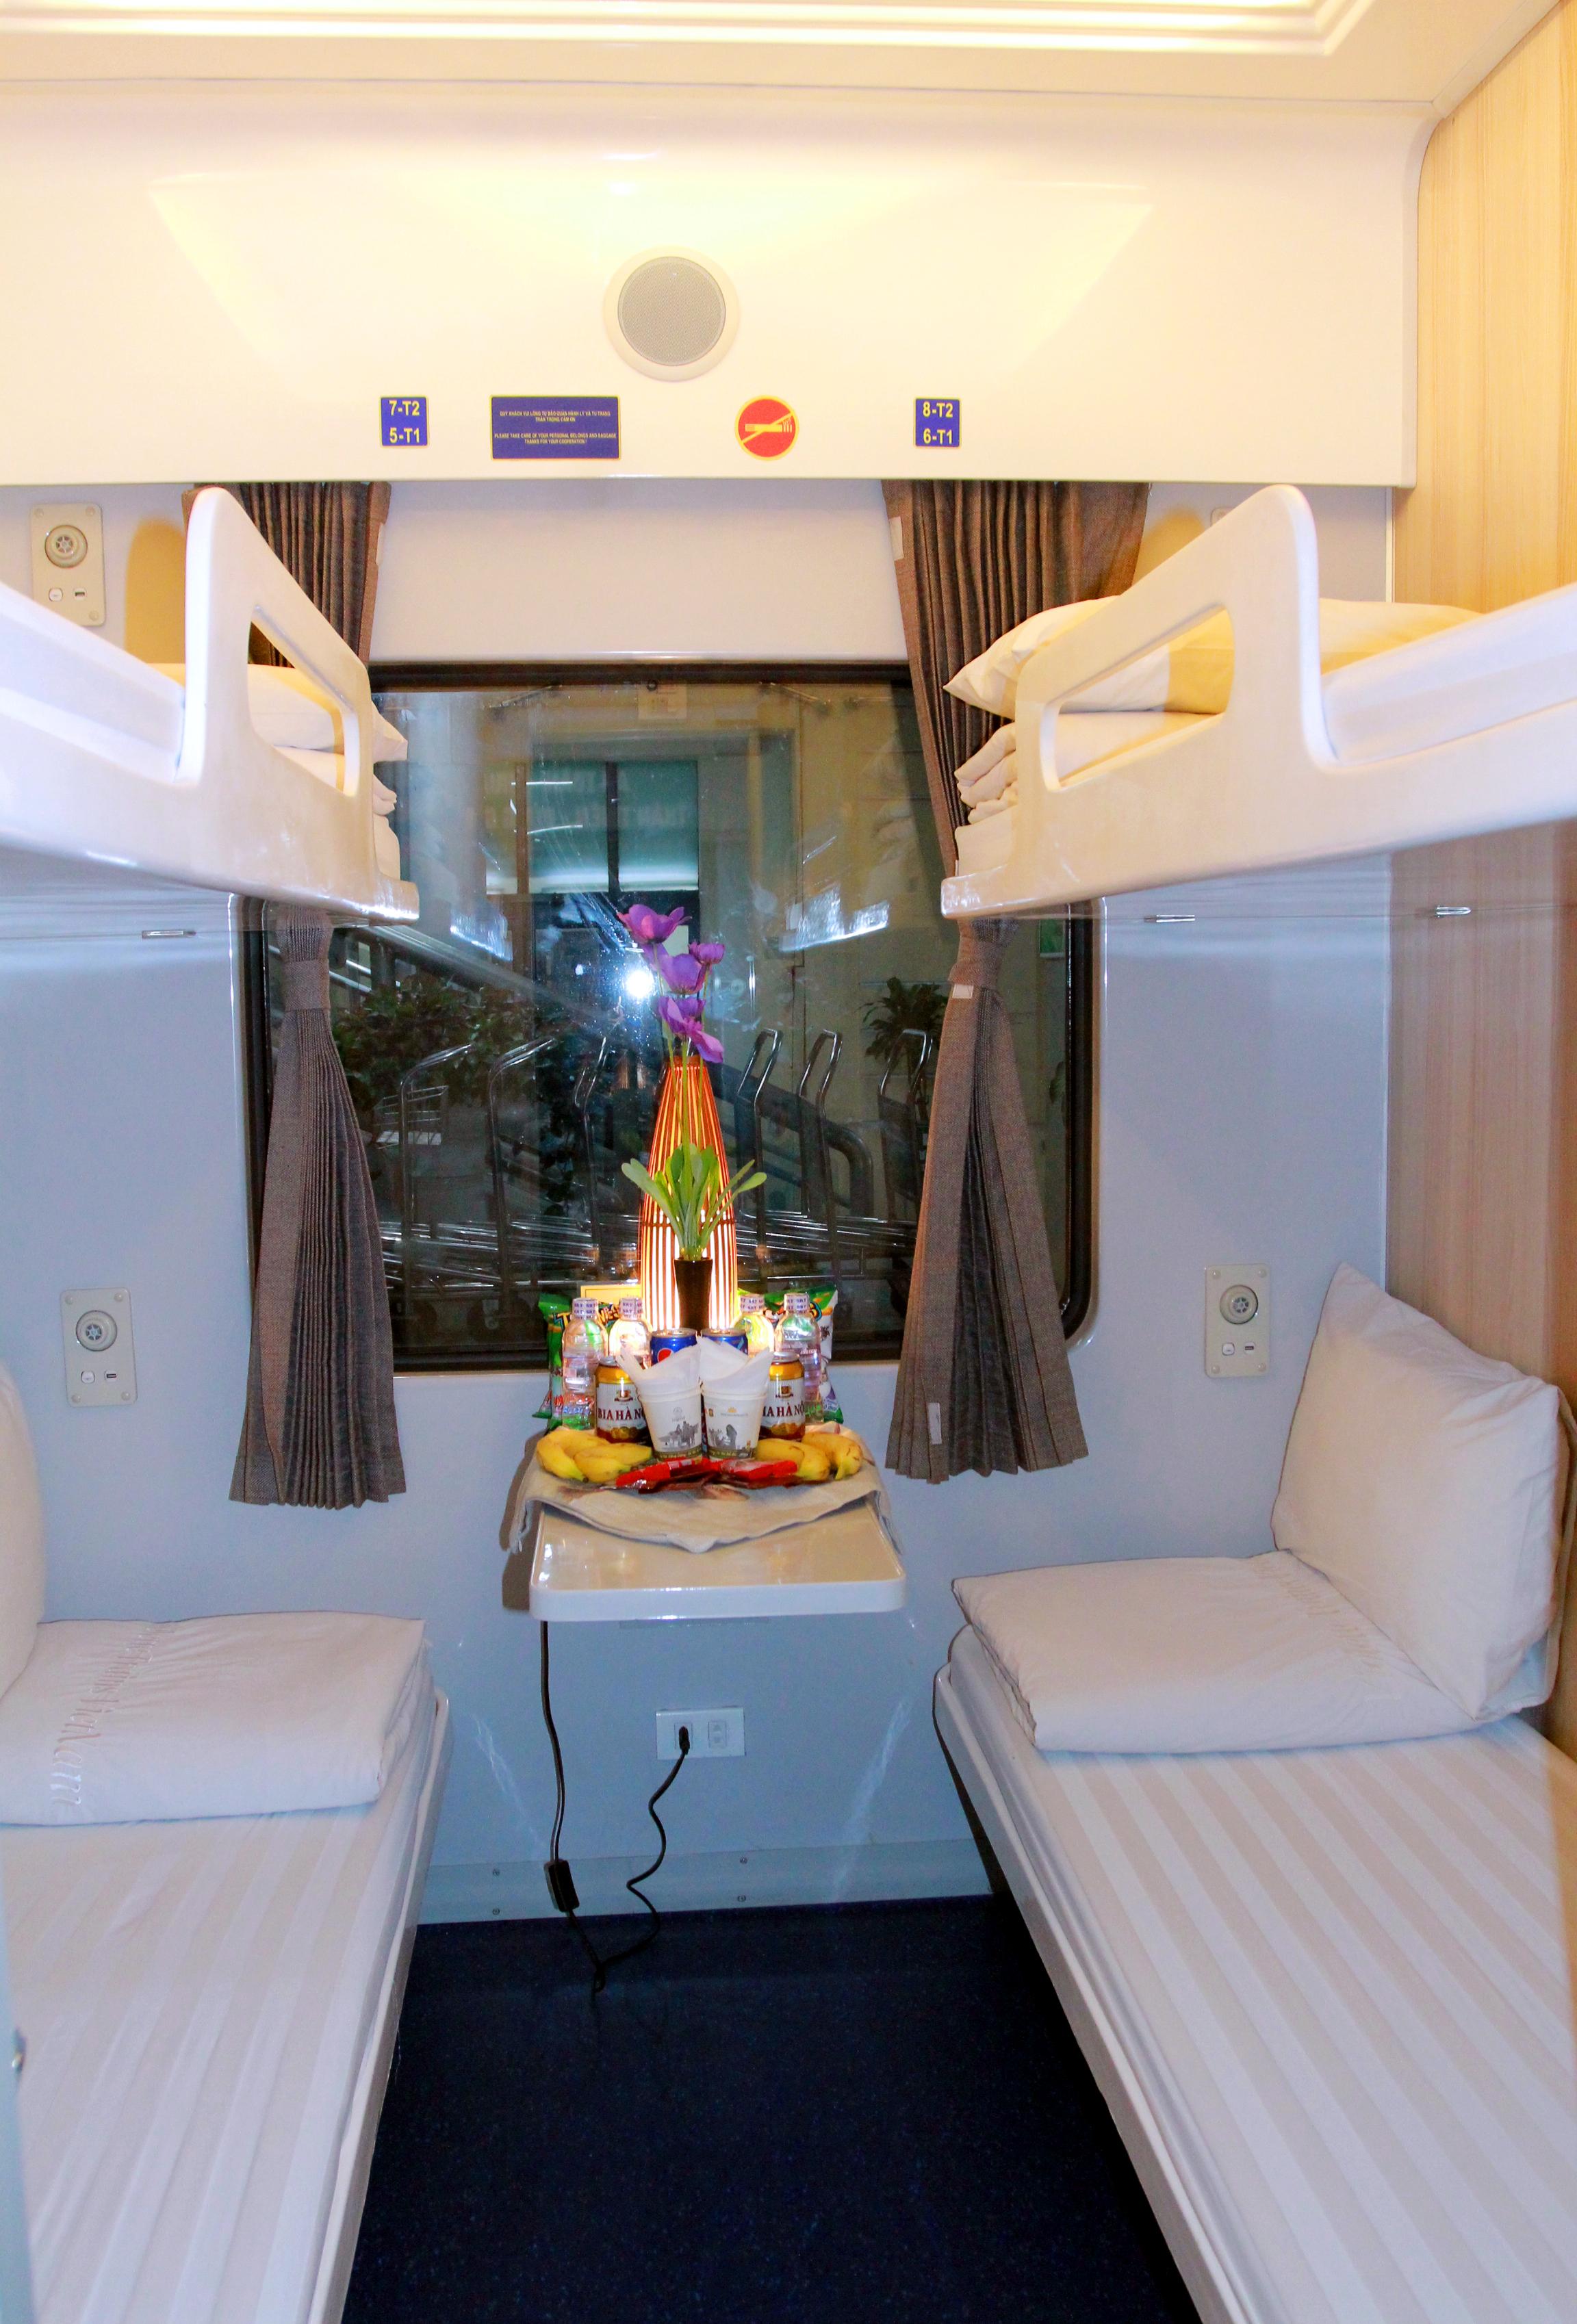 Ninh Bình – Huế on SE3 (21h44-8h55) (Deluxe 4 Berths Cabin, One Way)